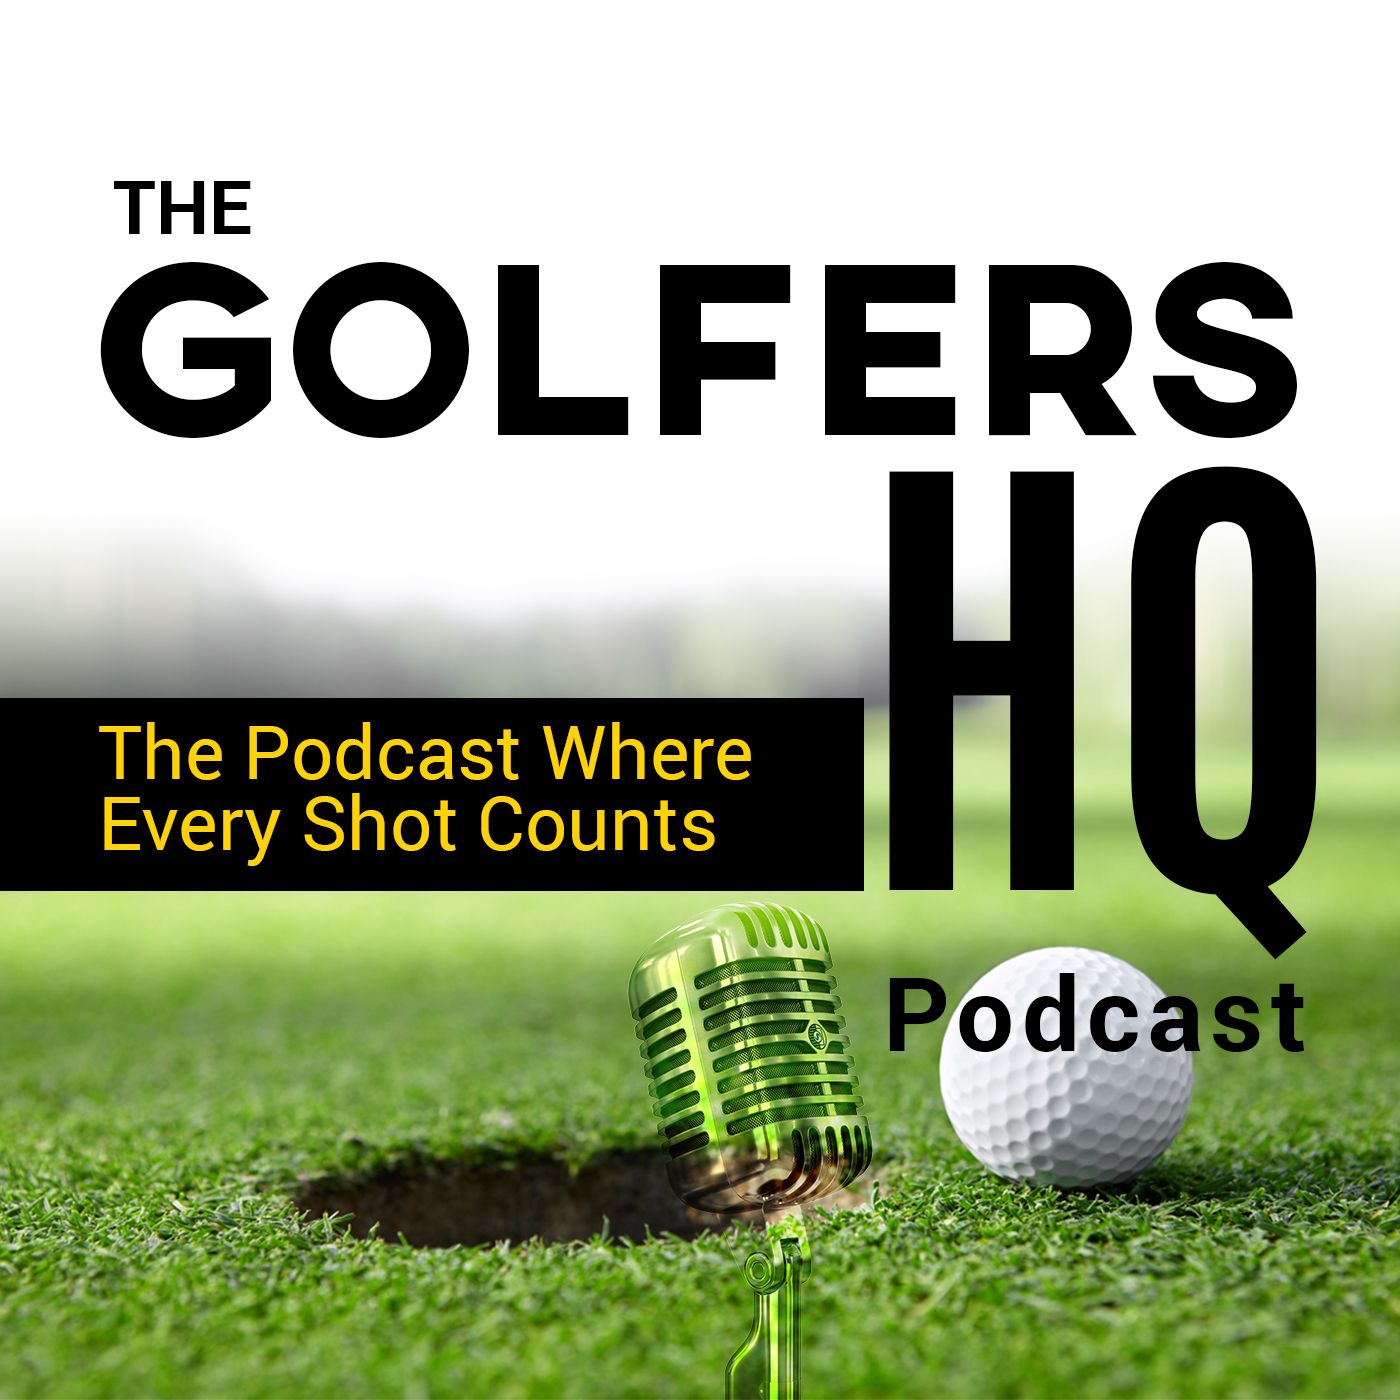 The Golfers HQ Podcast